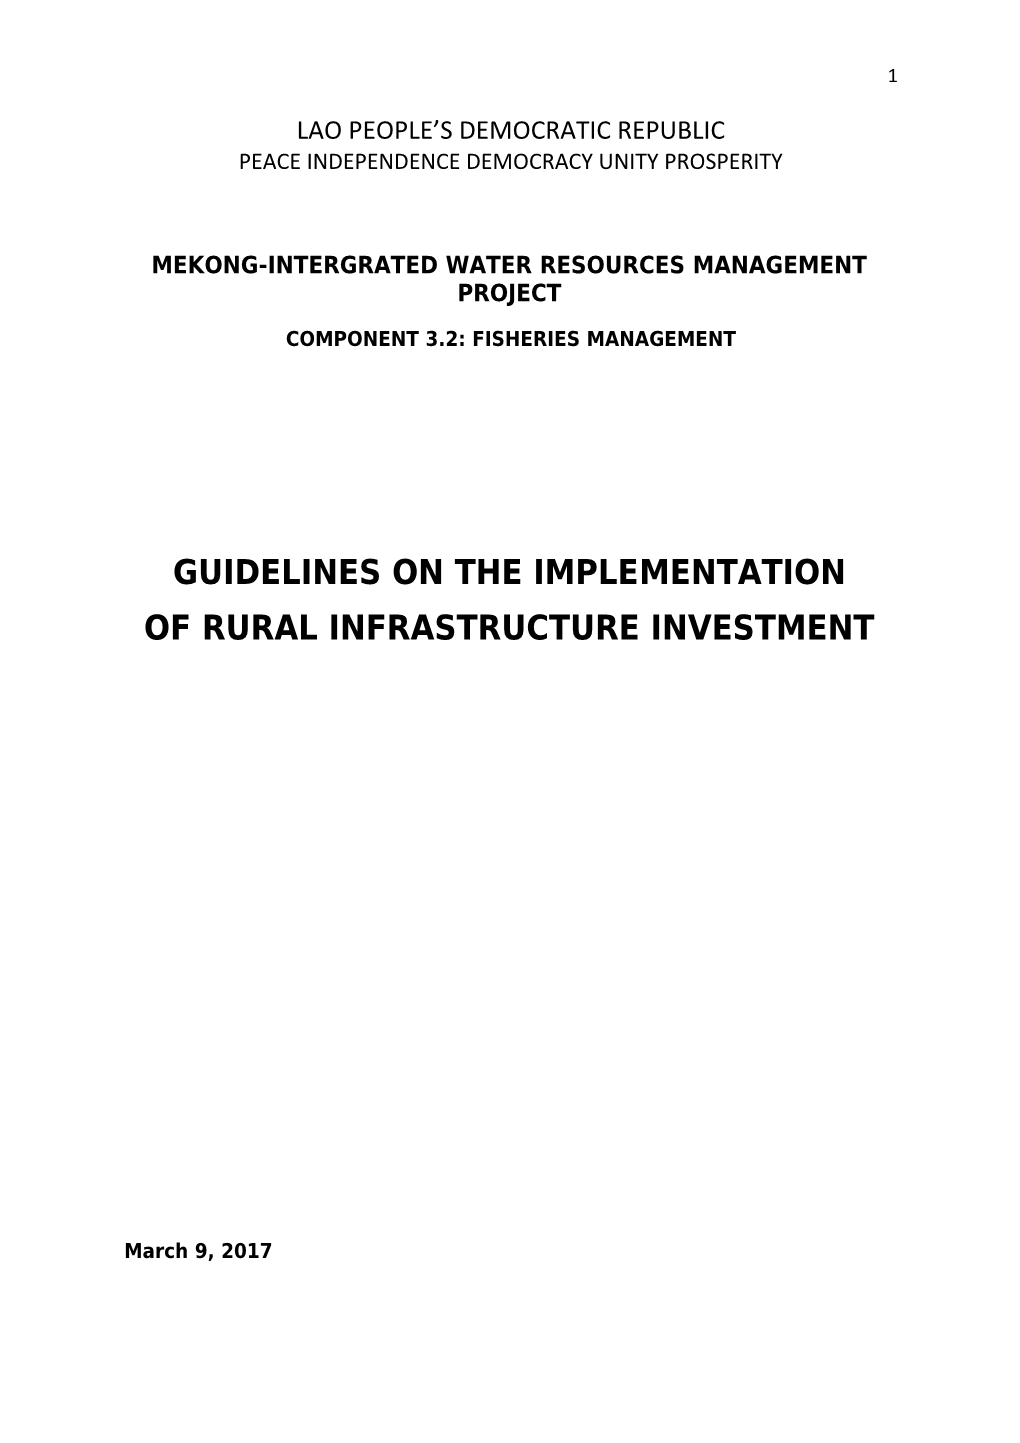 Mekong-Intergrated Water Resources Management Project